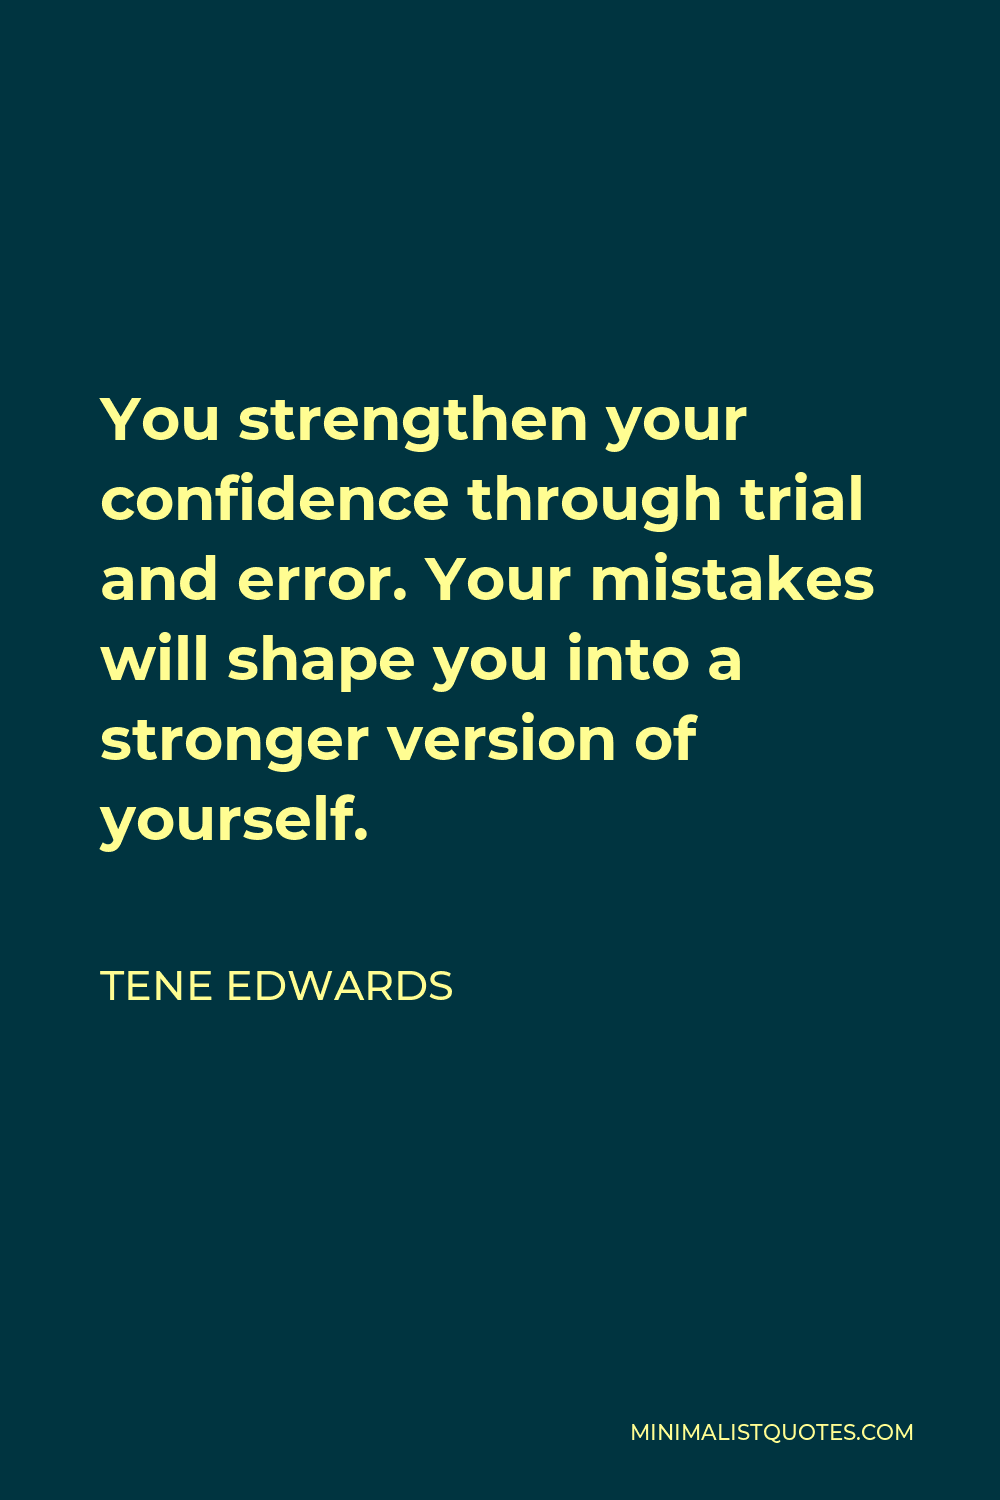 Tene Edwards Quote - You strengthen your confidence through trial and error. Your mistakes will shape you into a stronger version of yourself.